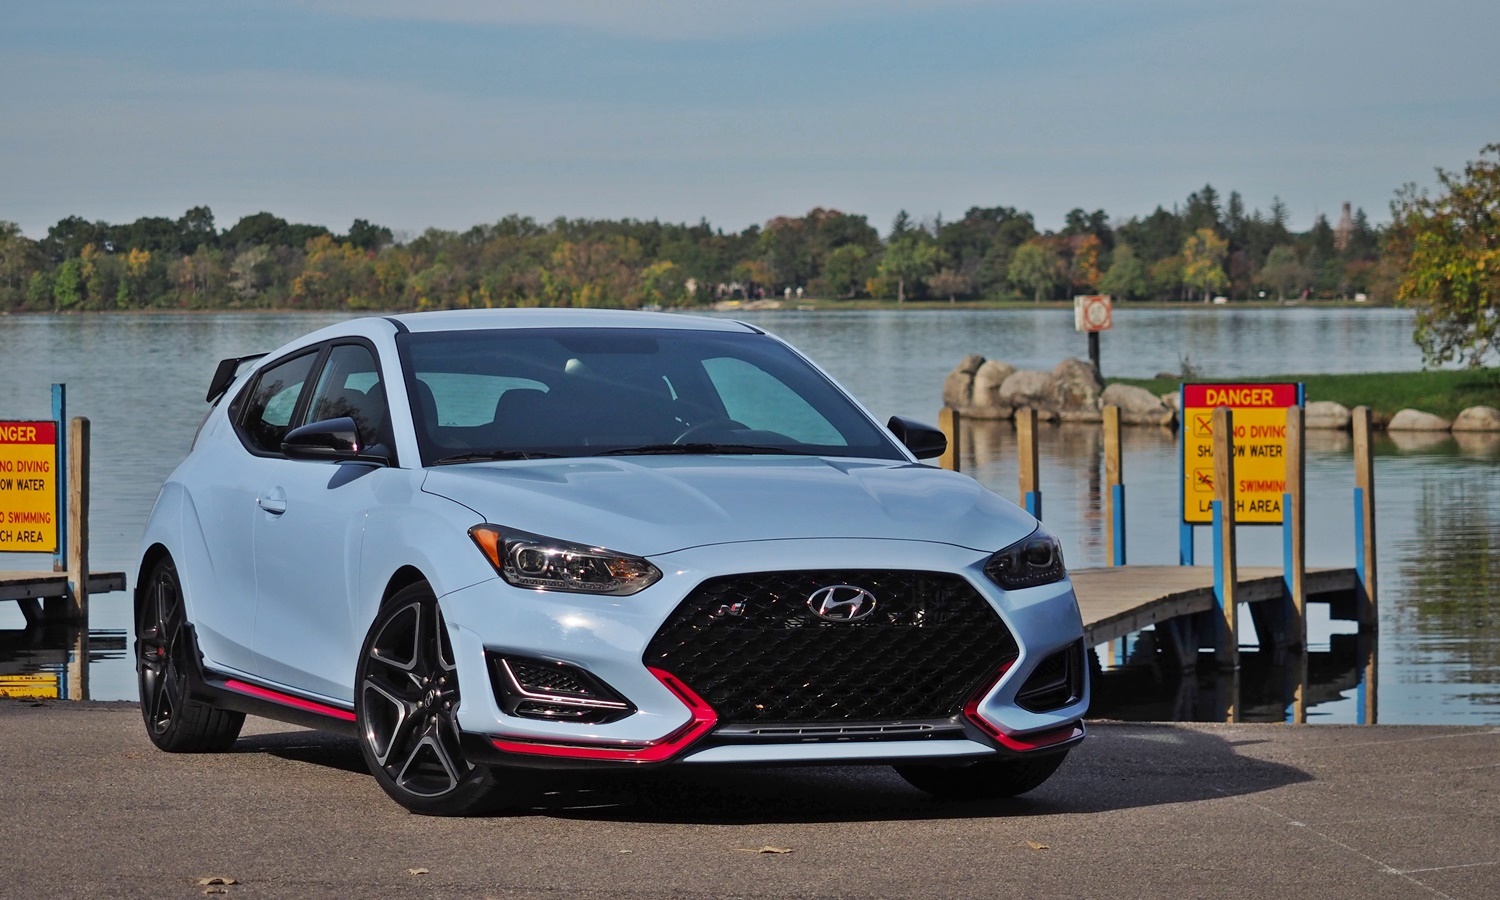 Veloster Reviews: Hyundai Veloster N front angle view